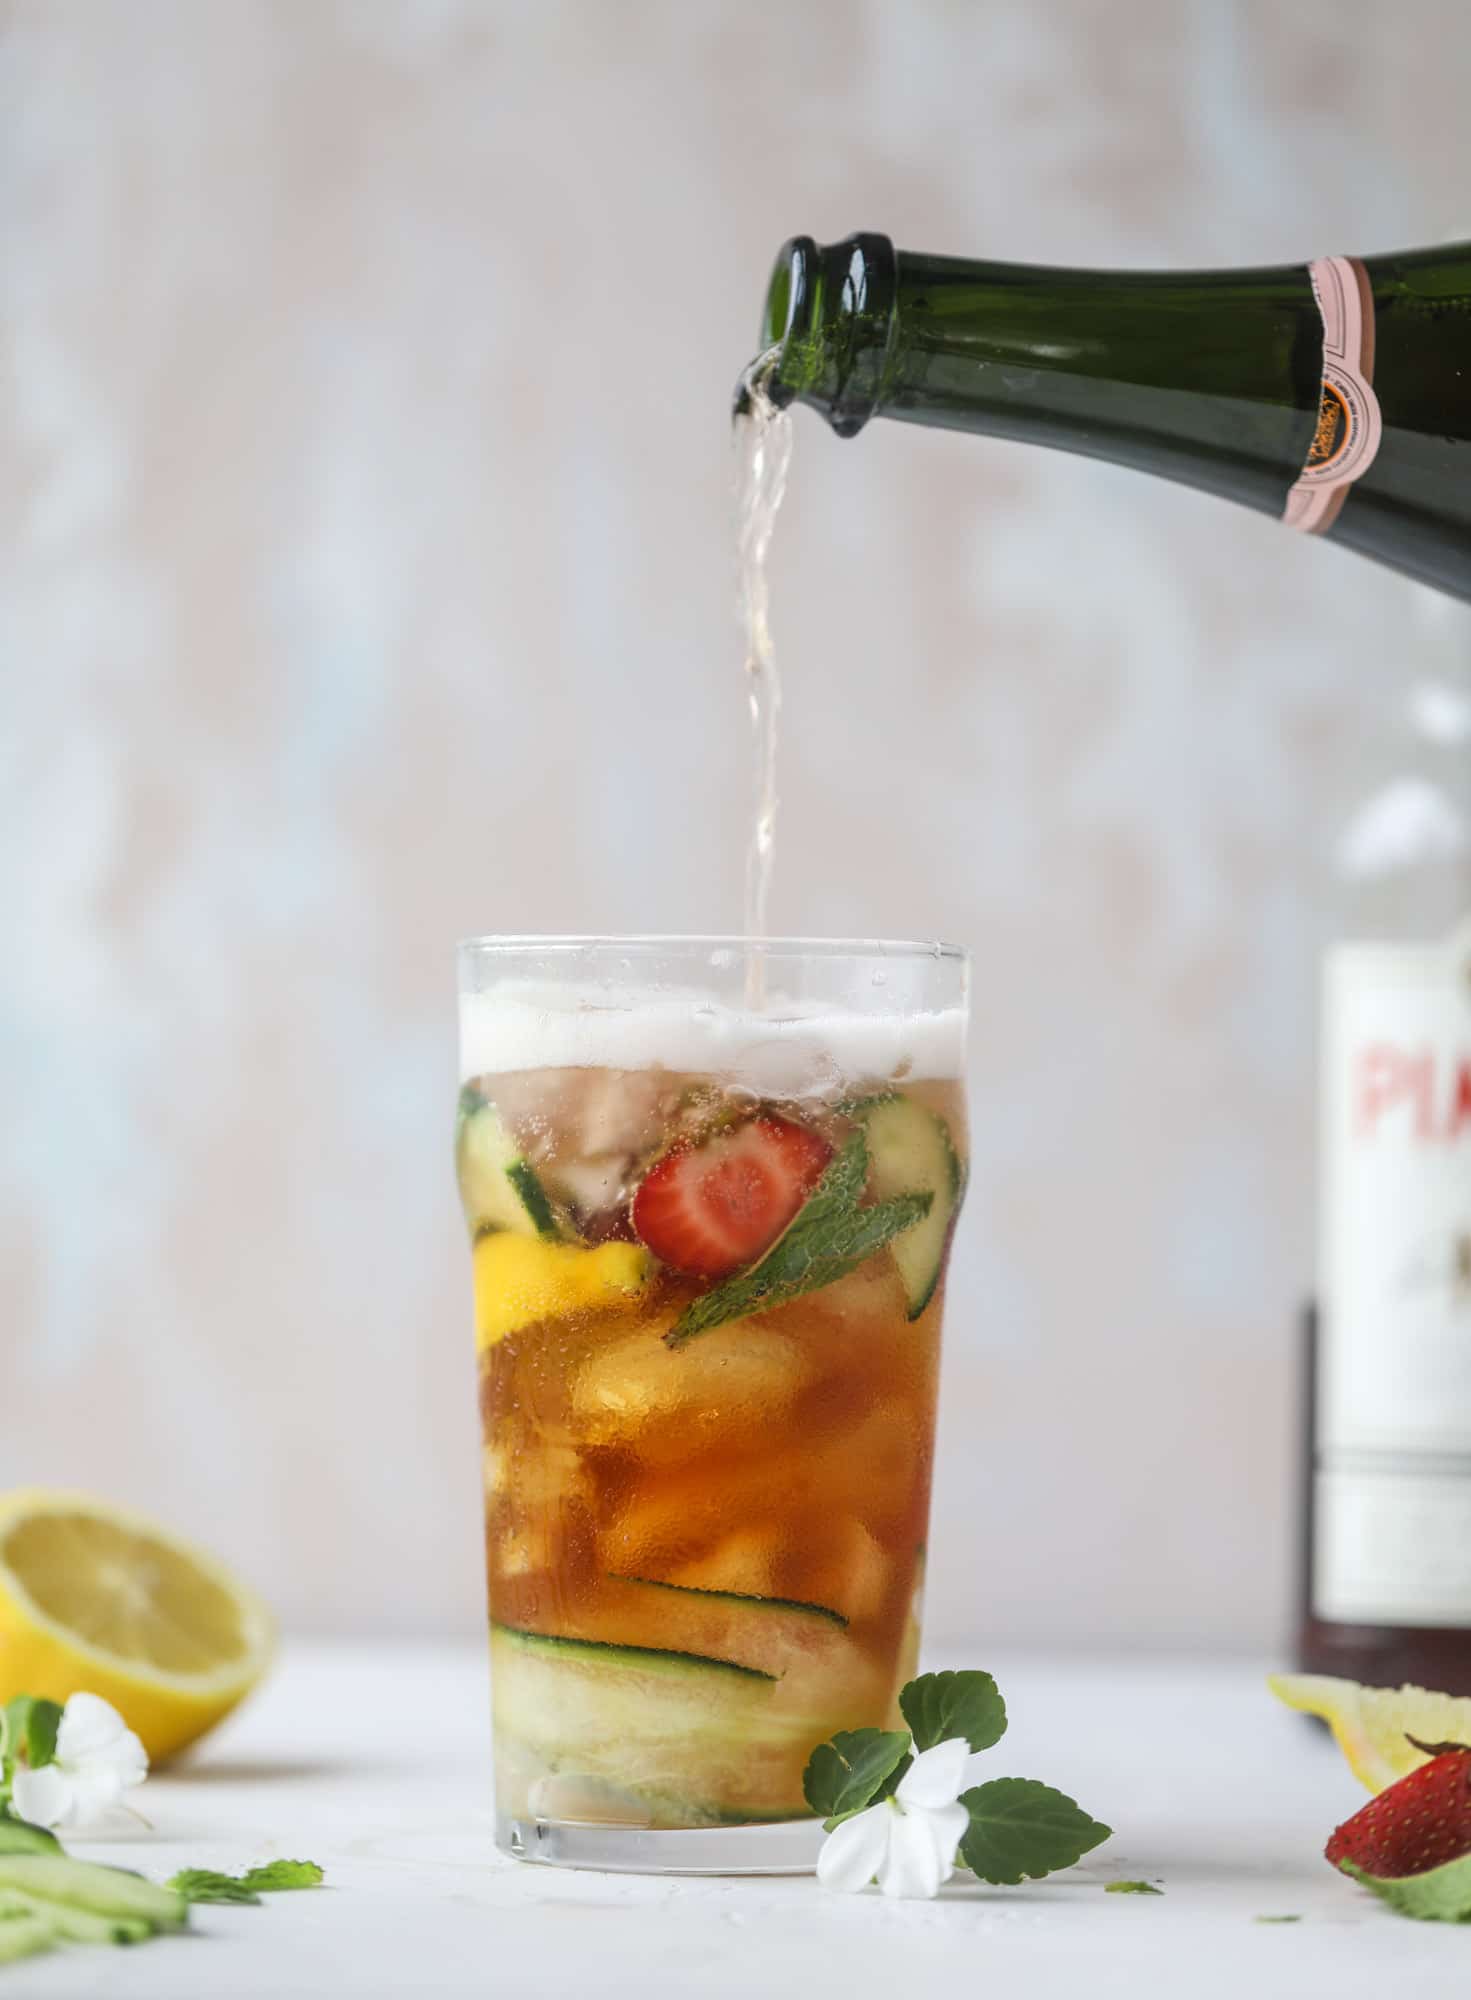 I love a delicious Pimm's Cup in the heart of summer! This was is topped with sparkling rosé wine and filled with strawberries, cucumbers and lemon wedges. It's super refreshing and perfect on hot hot days! I howsweeteats.com #pimms #cup #recipe #cocktails #rosé #sparkling #summer